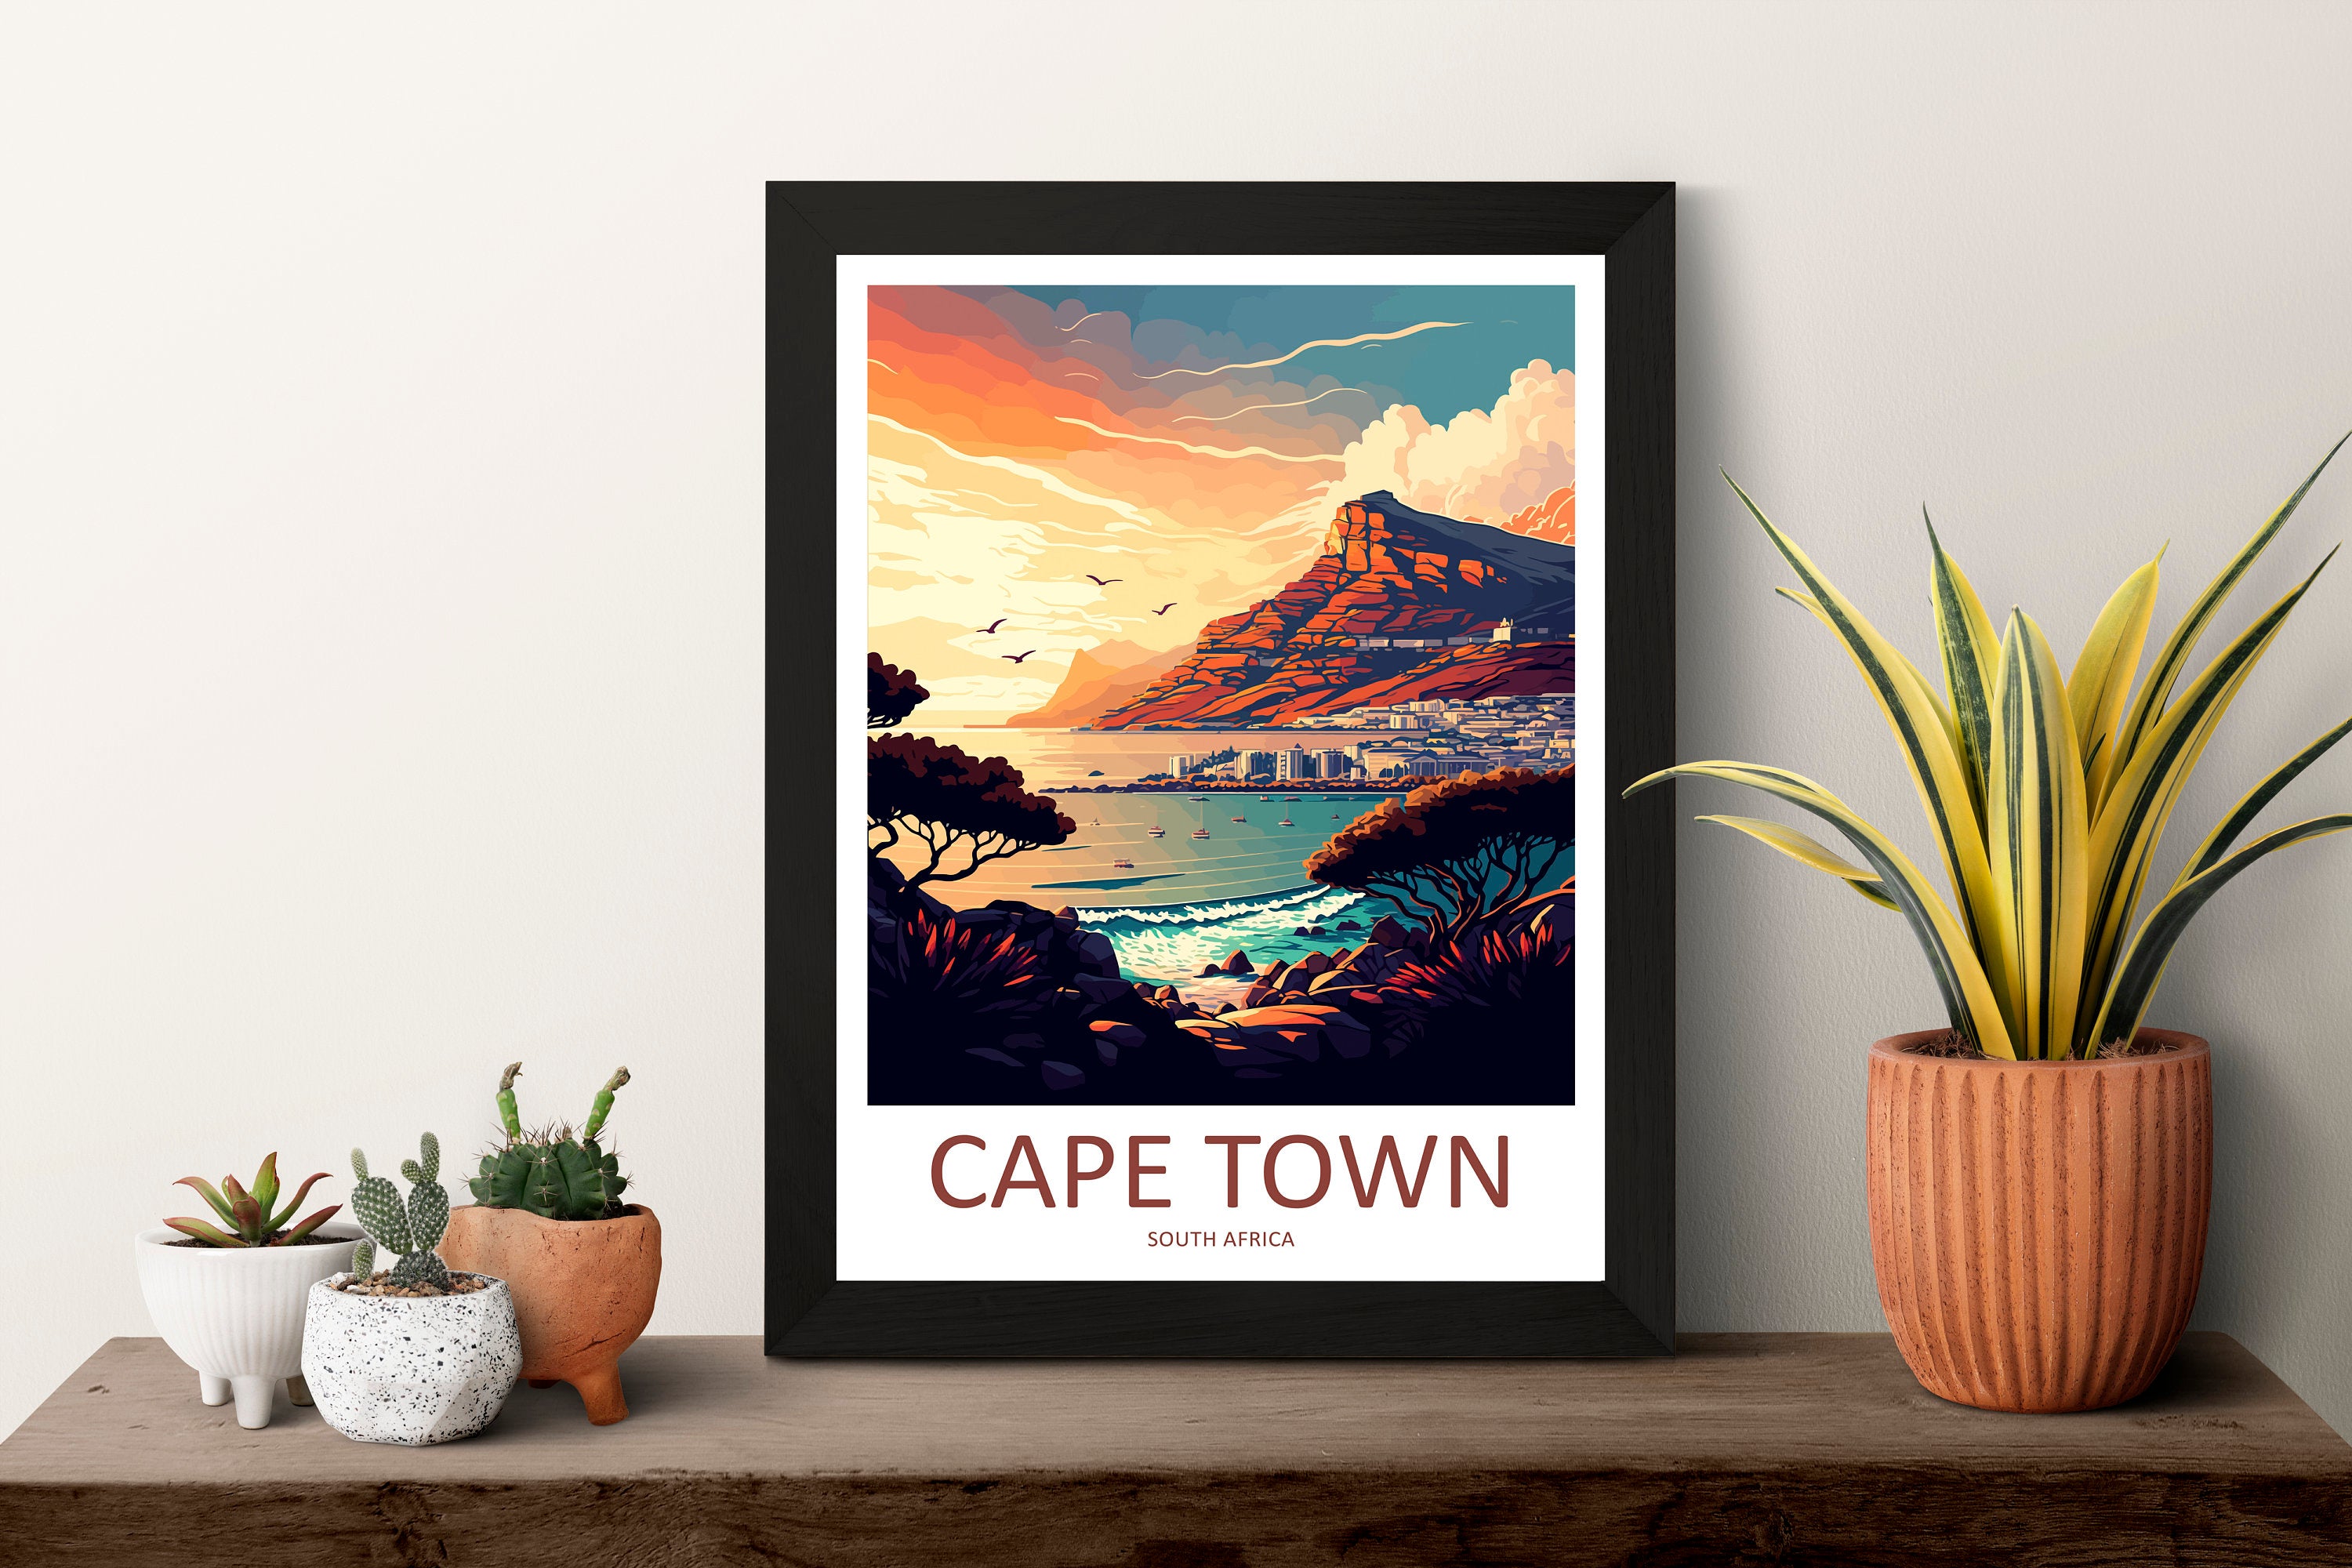 Cape Town Travel Print Wall Art Cape Town Wall Hanging Home Décor Cape Town Gift Art Lovers South Africa Art Print Cape Town Wall Décor Art